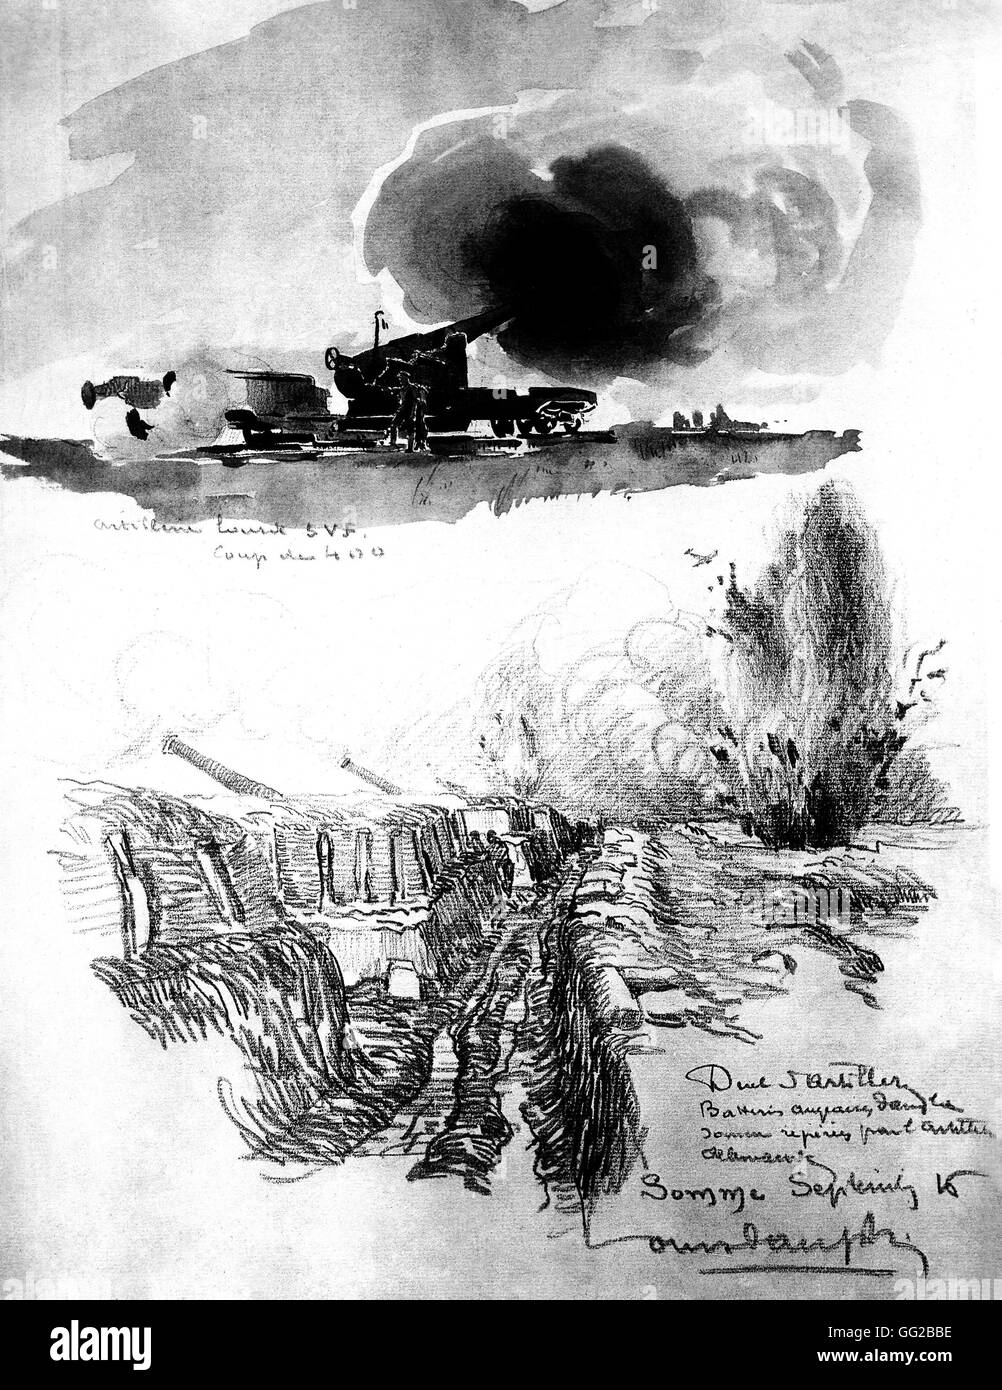 Heavy artillery and artillery battle of the Somme Illustration by Louis Dauphin September 1916 France, World War I Brussels, War Museum Stock Photo